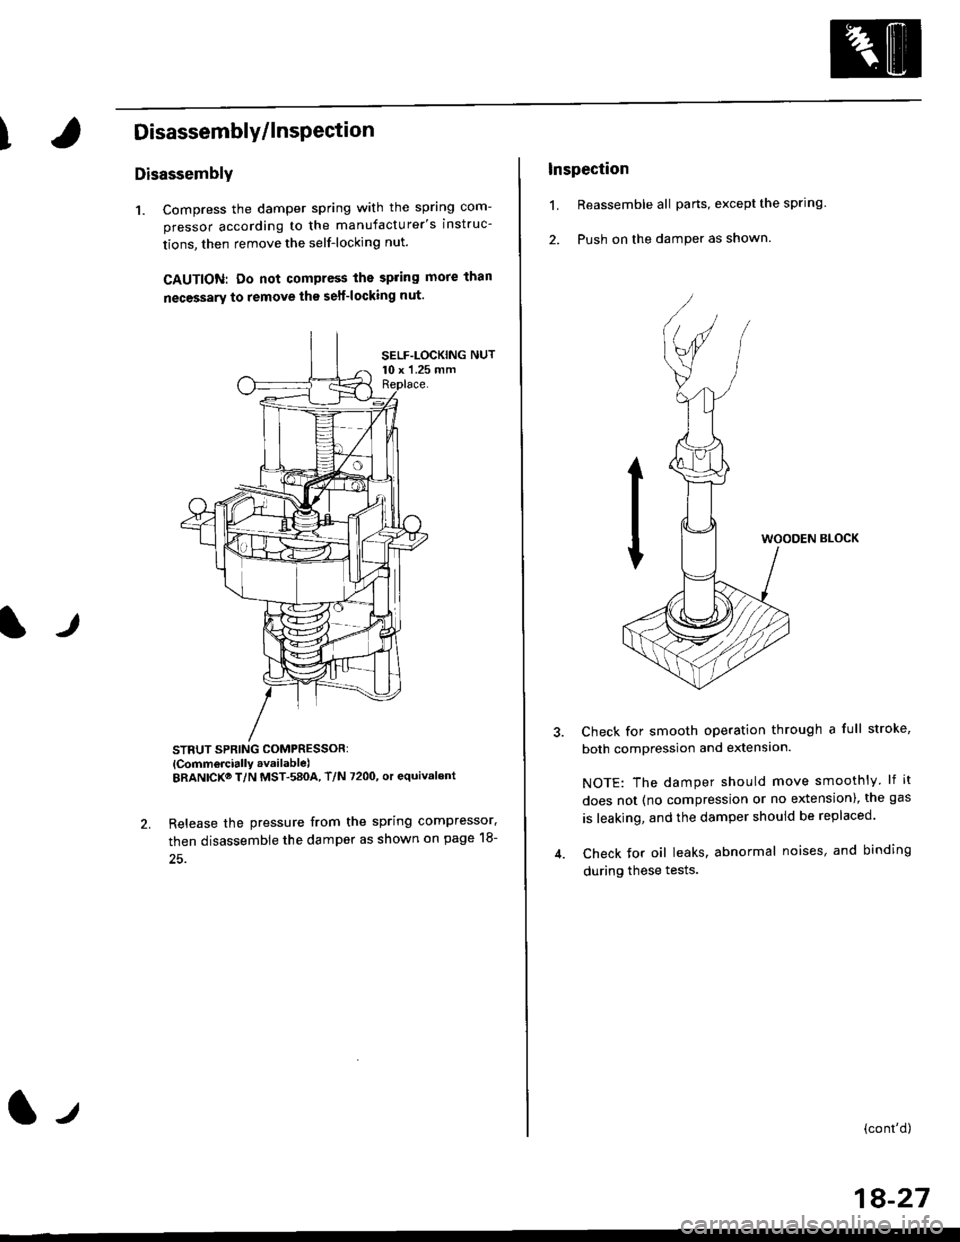 HONDA CIVIC 1998 6.G Workshop Manual IDisassembly/lnsPection
lr
Disassembly
1. Compress the damper spring with the spring com-
pressor according to the manufacturers instruc-
tions, then remove the self-locking nut.
GAUTION: Do not comp